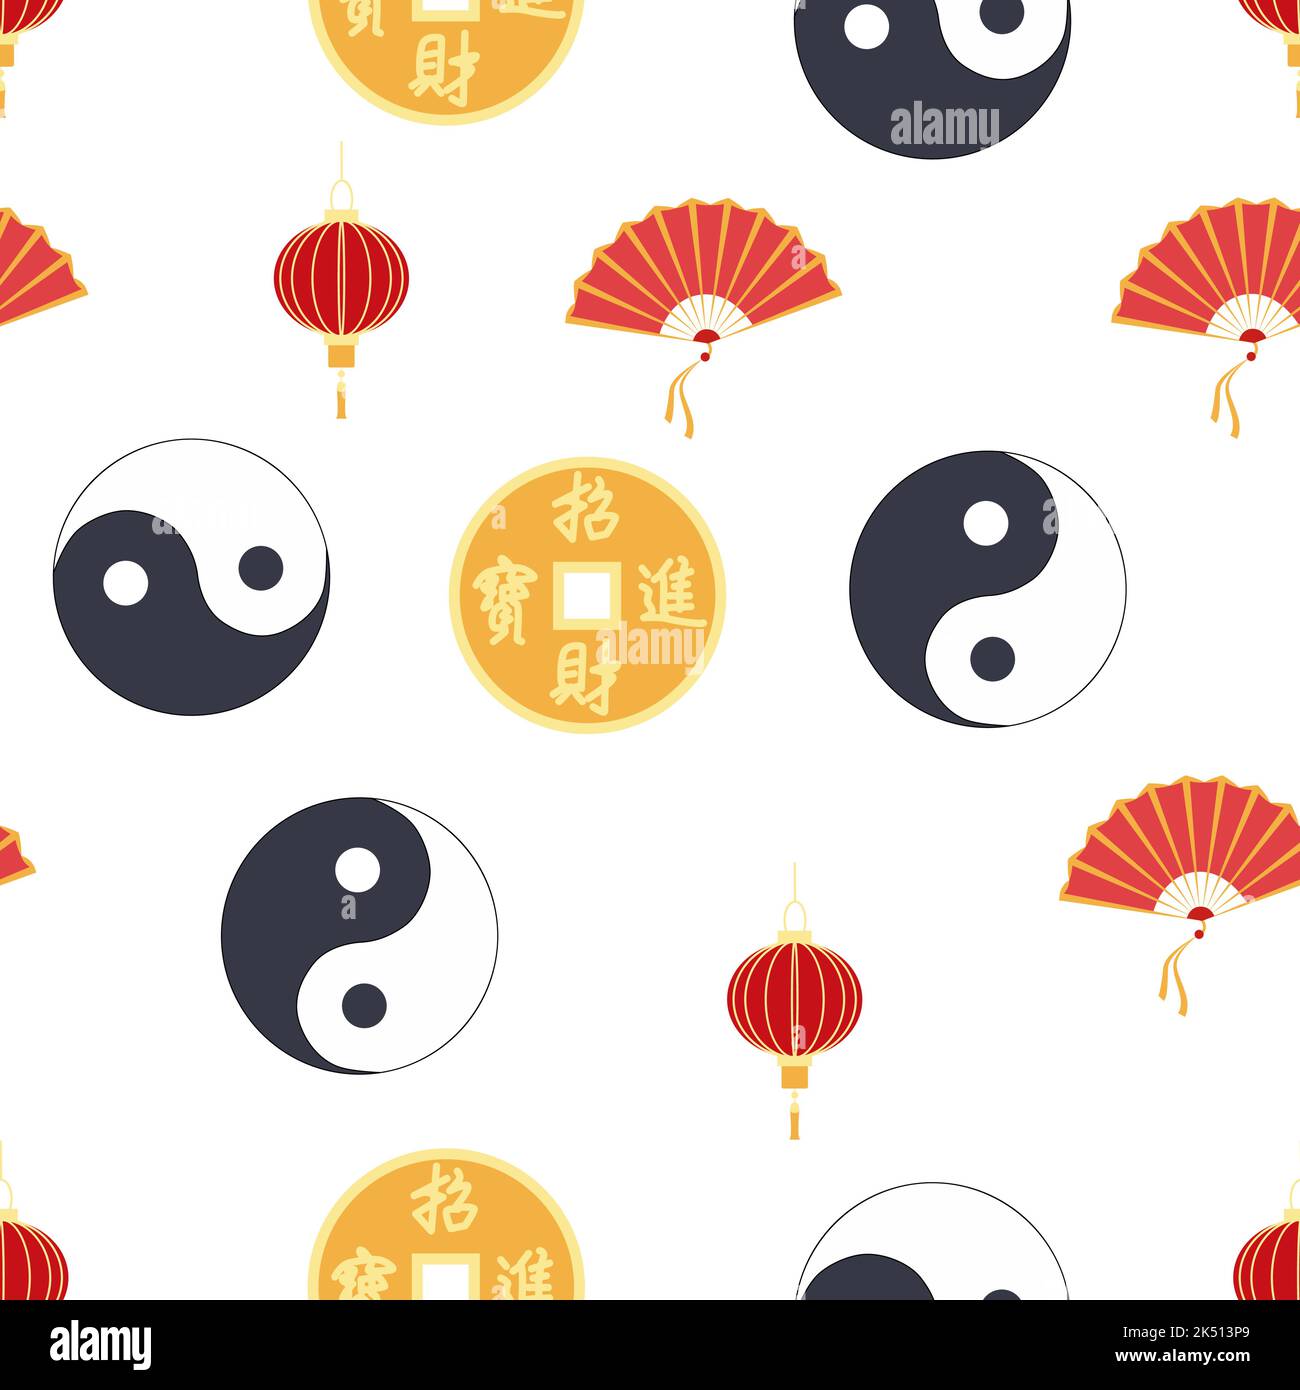 Chinese seamless pattern with feng shui chinese coin with hole, yin-yang, fan, paper lantern. Stock Vector